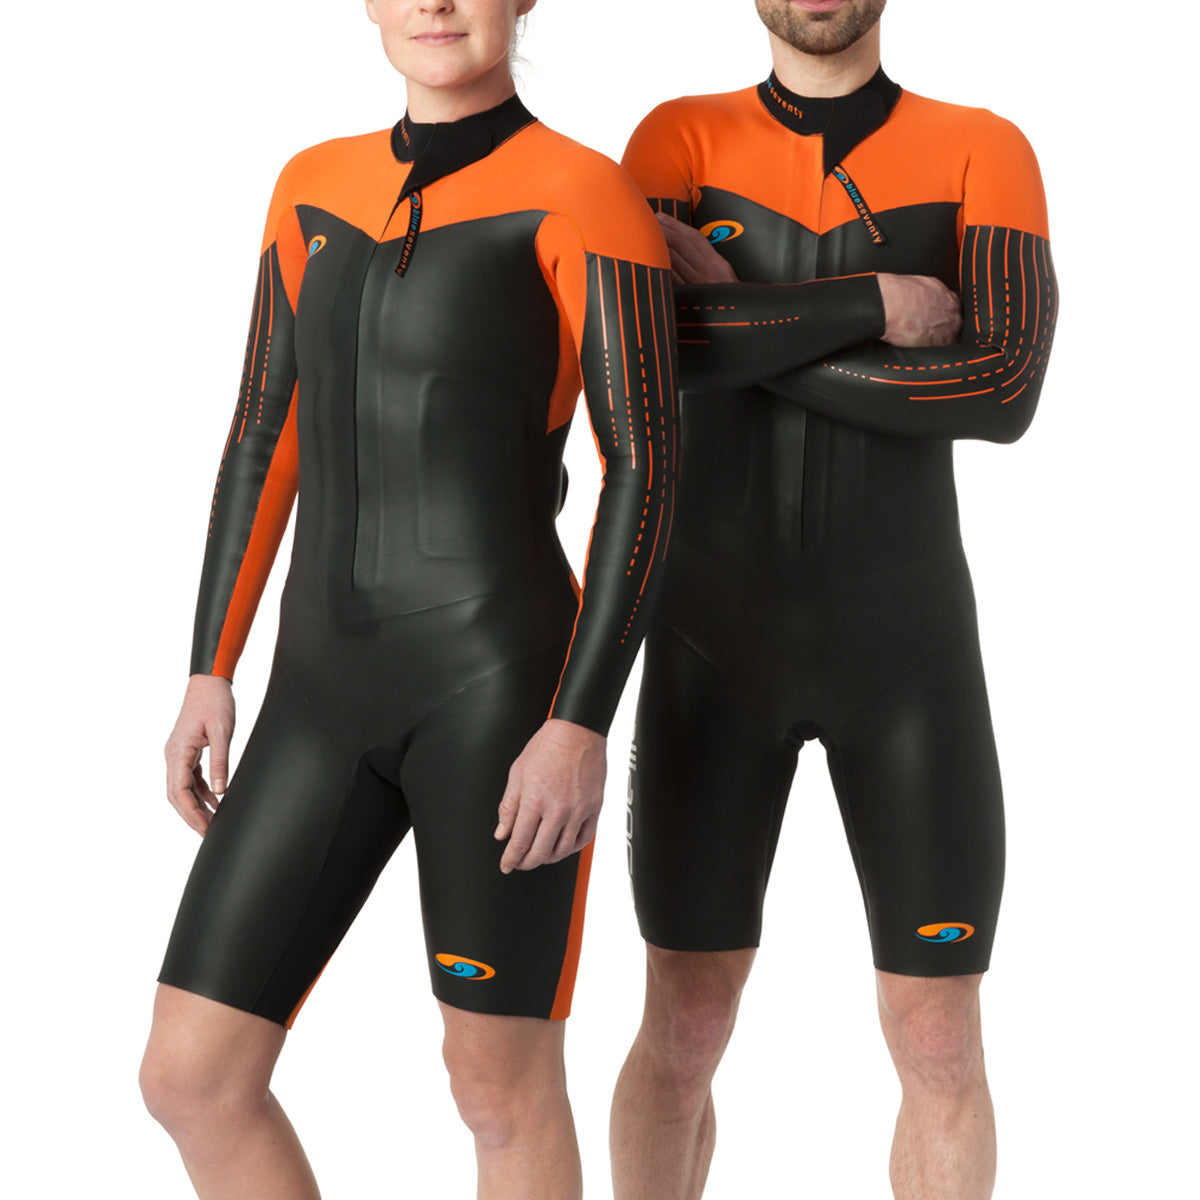 Triathlon Wetsuits, Open Water Swimming Wetsuits - Ly Sports